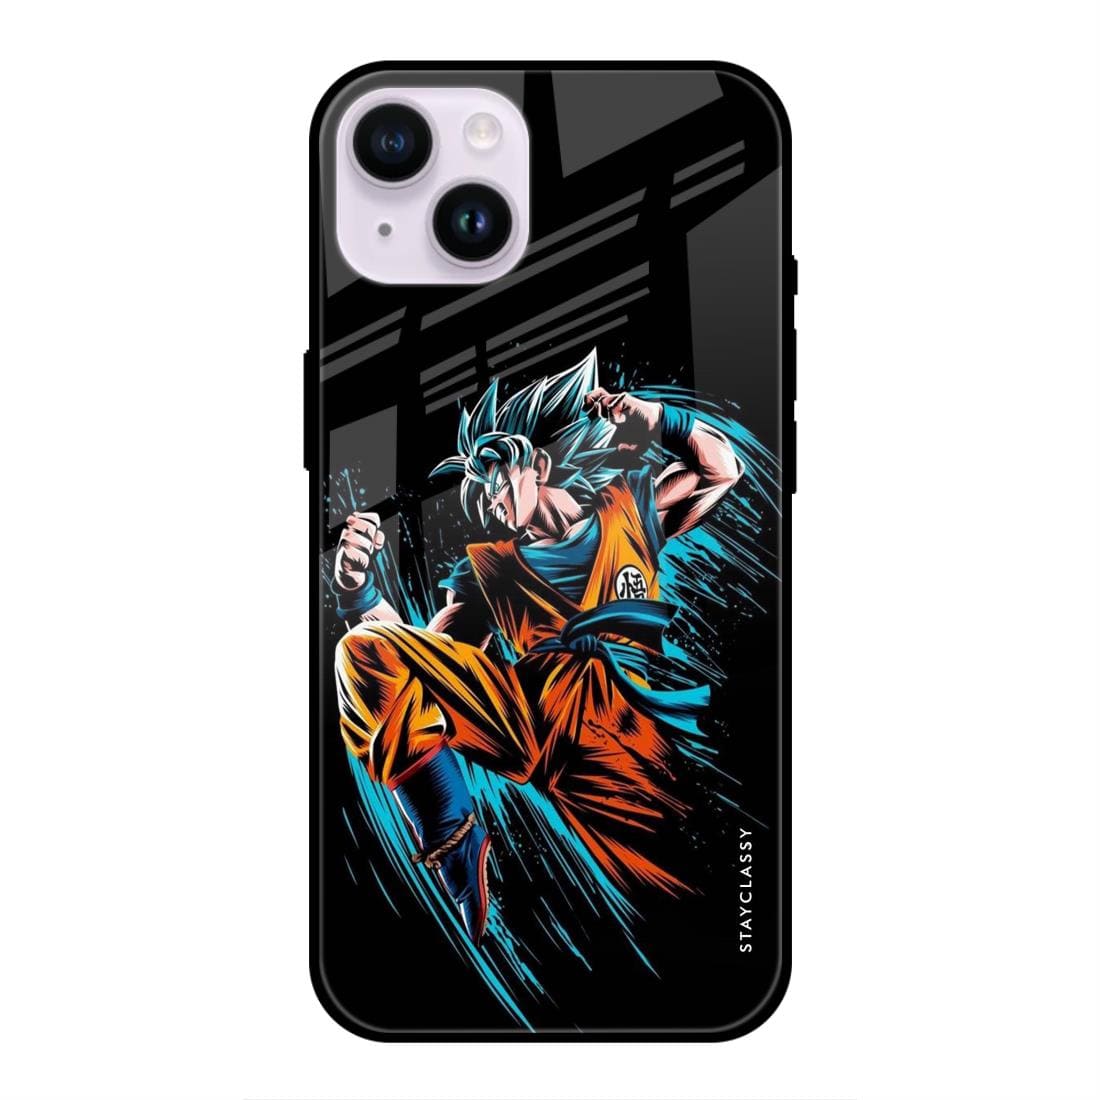 OSOBOE Anime Cover Case OBOSOE Cases Cover For iPhone India | Ubuy